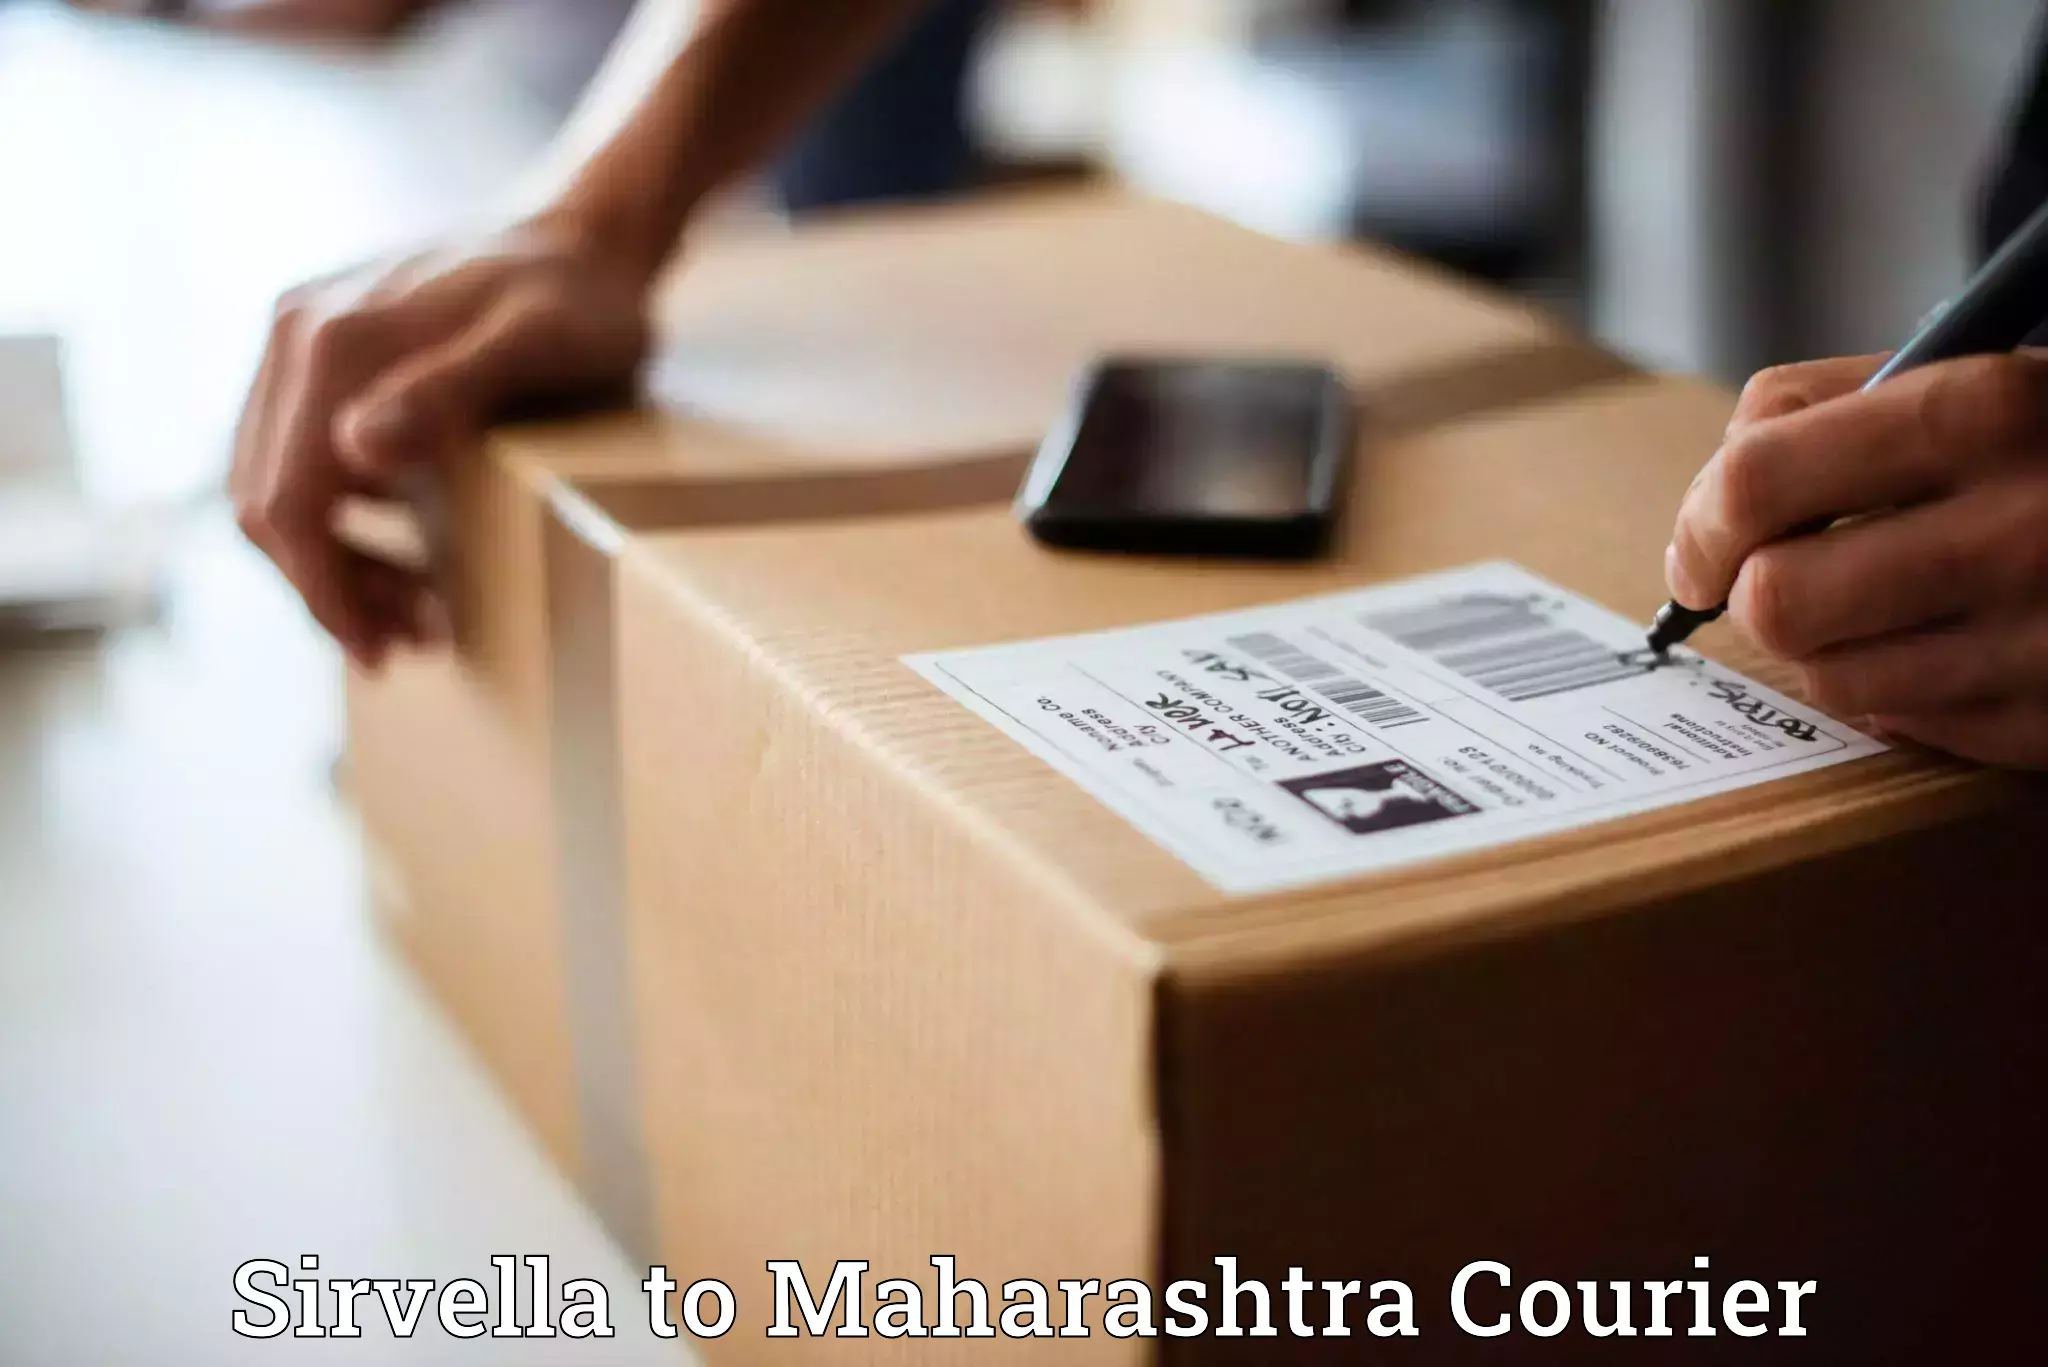 Rapid shipping services Sirvella to SVKMs Narsee Monjee Institute of Management Studies Mumbai